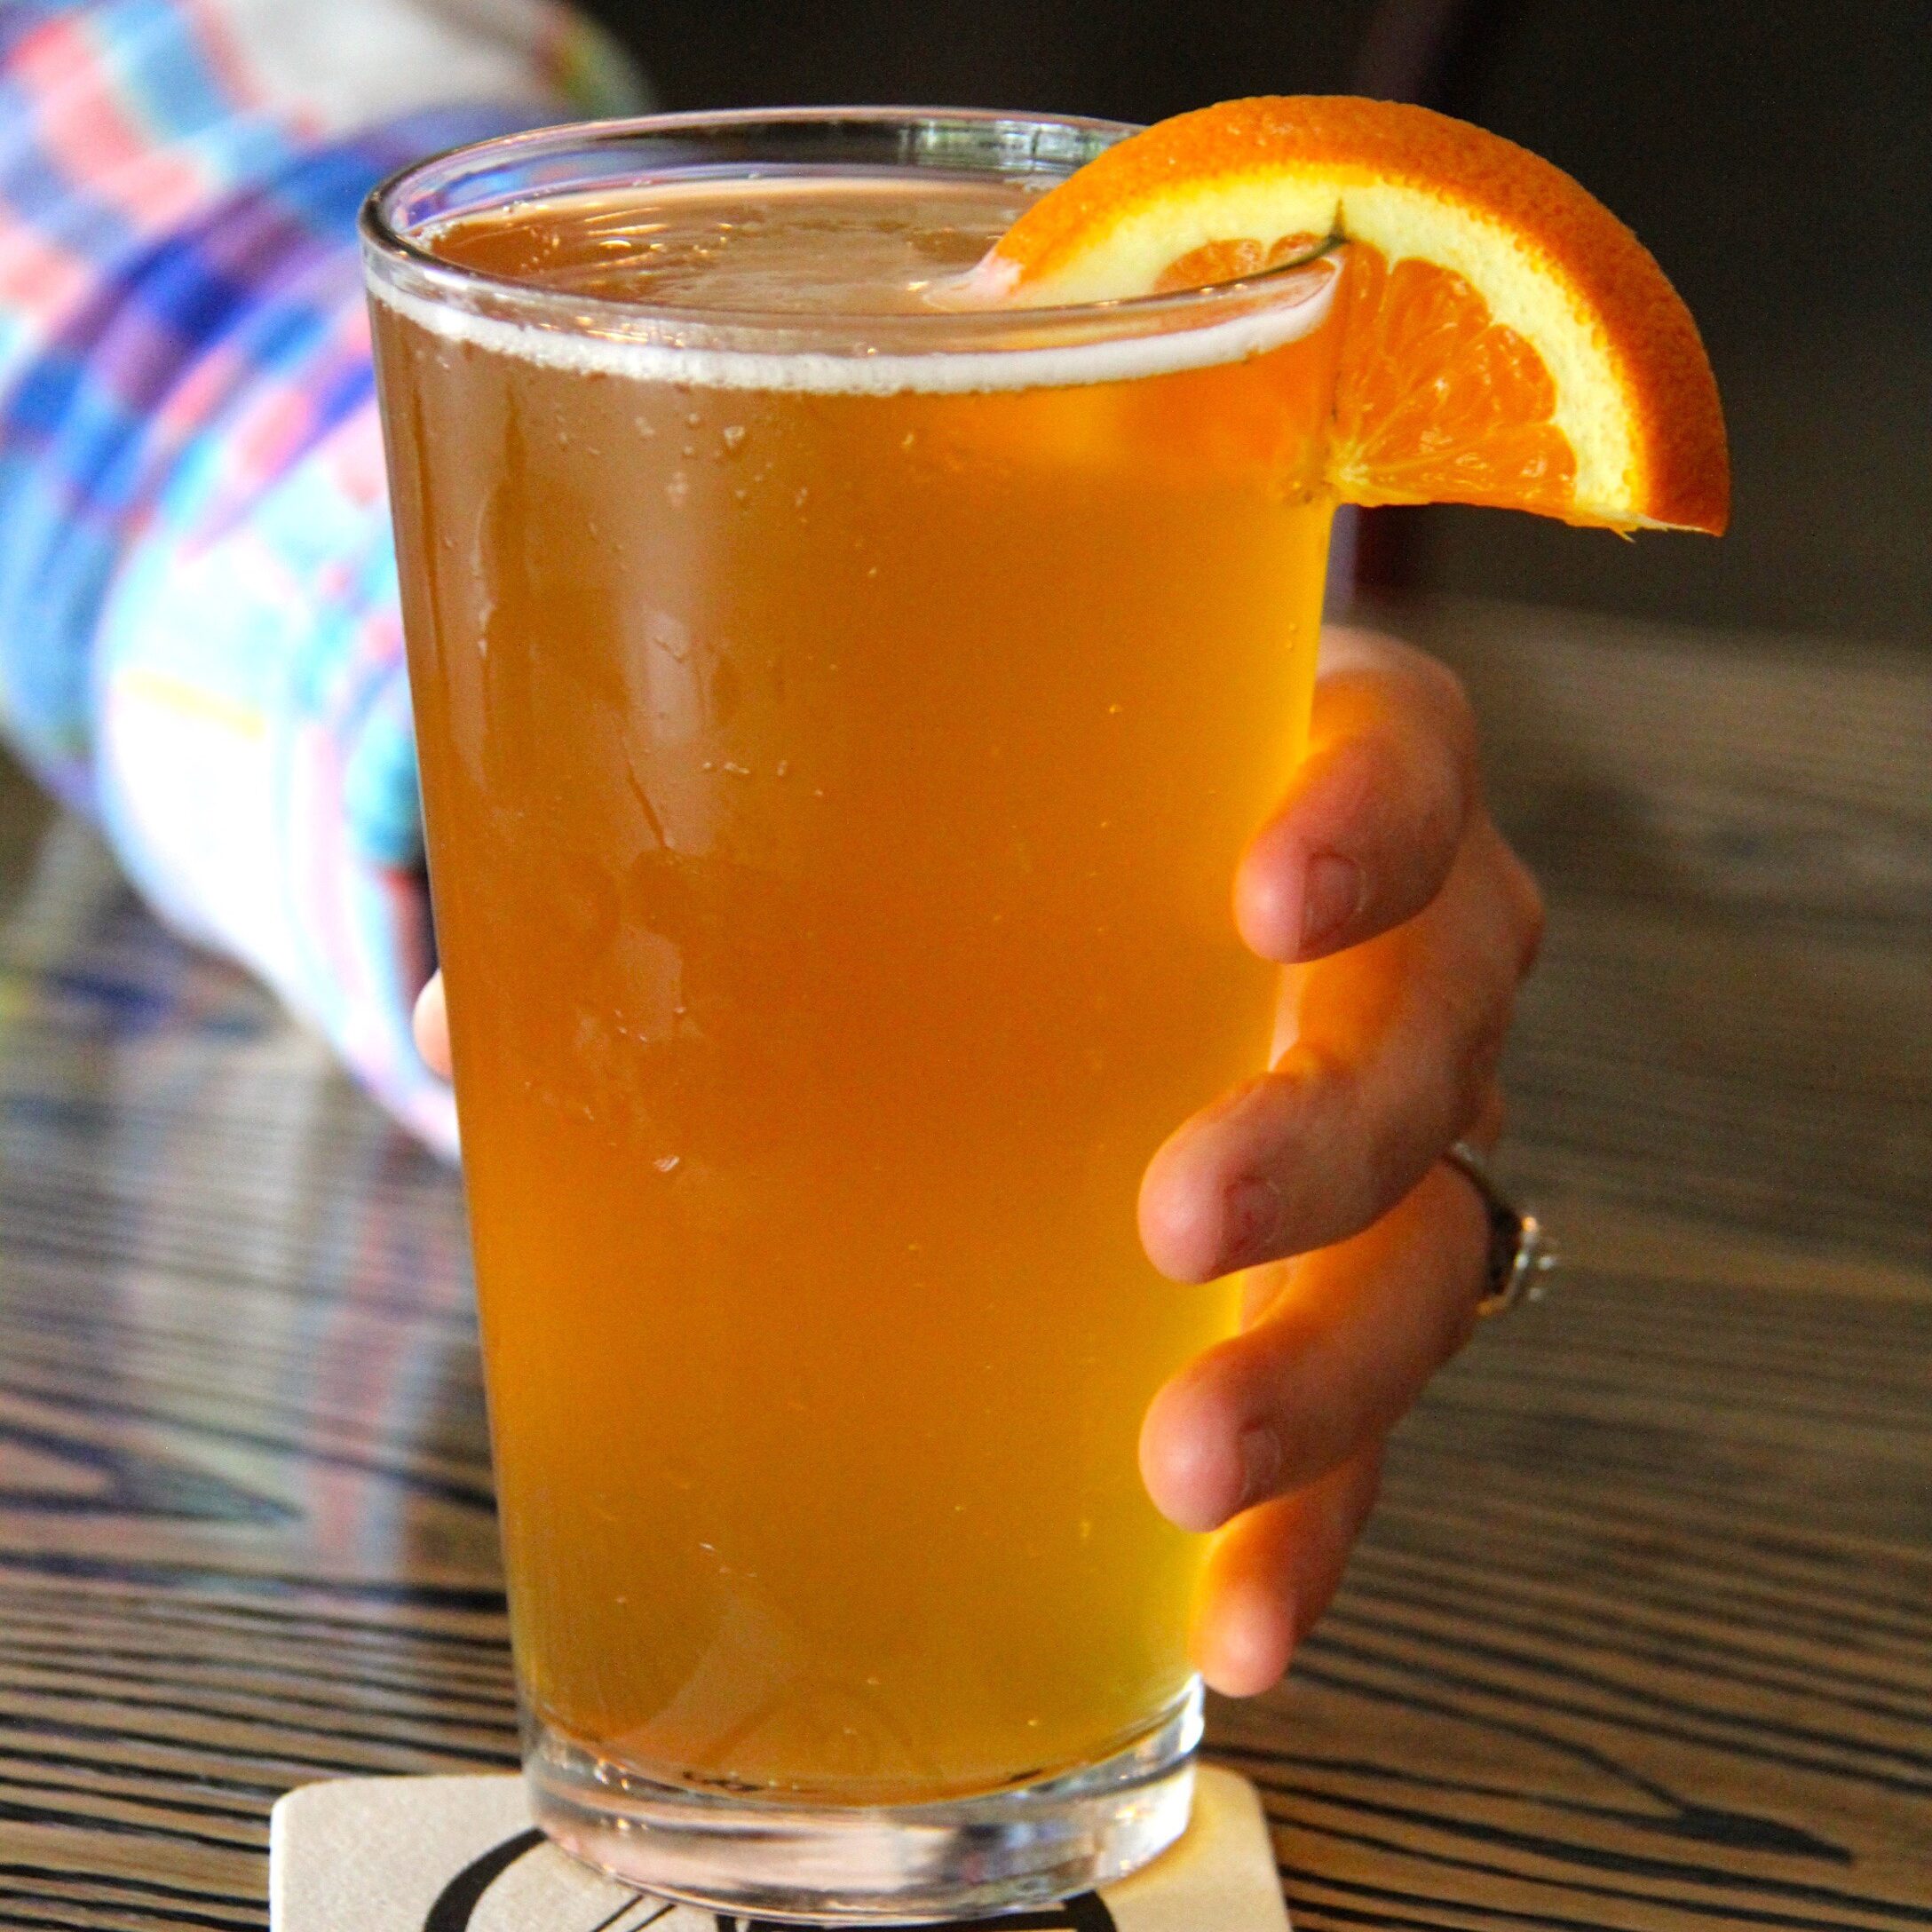 A person in a checked shirt with a ring holds an amber beer with an orange slice as a garnish. Photo credit: Les Cheneaux Distillers